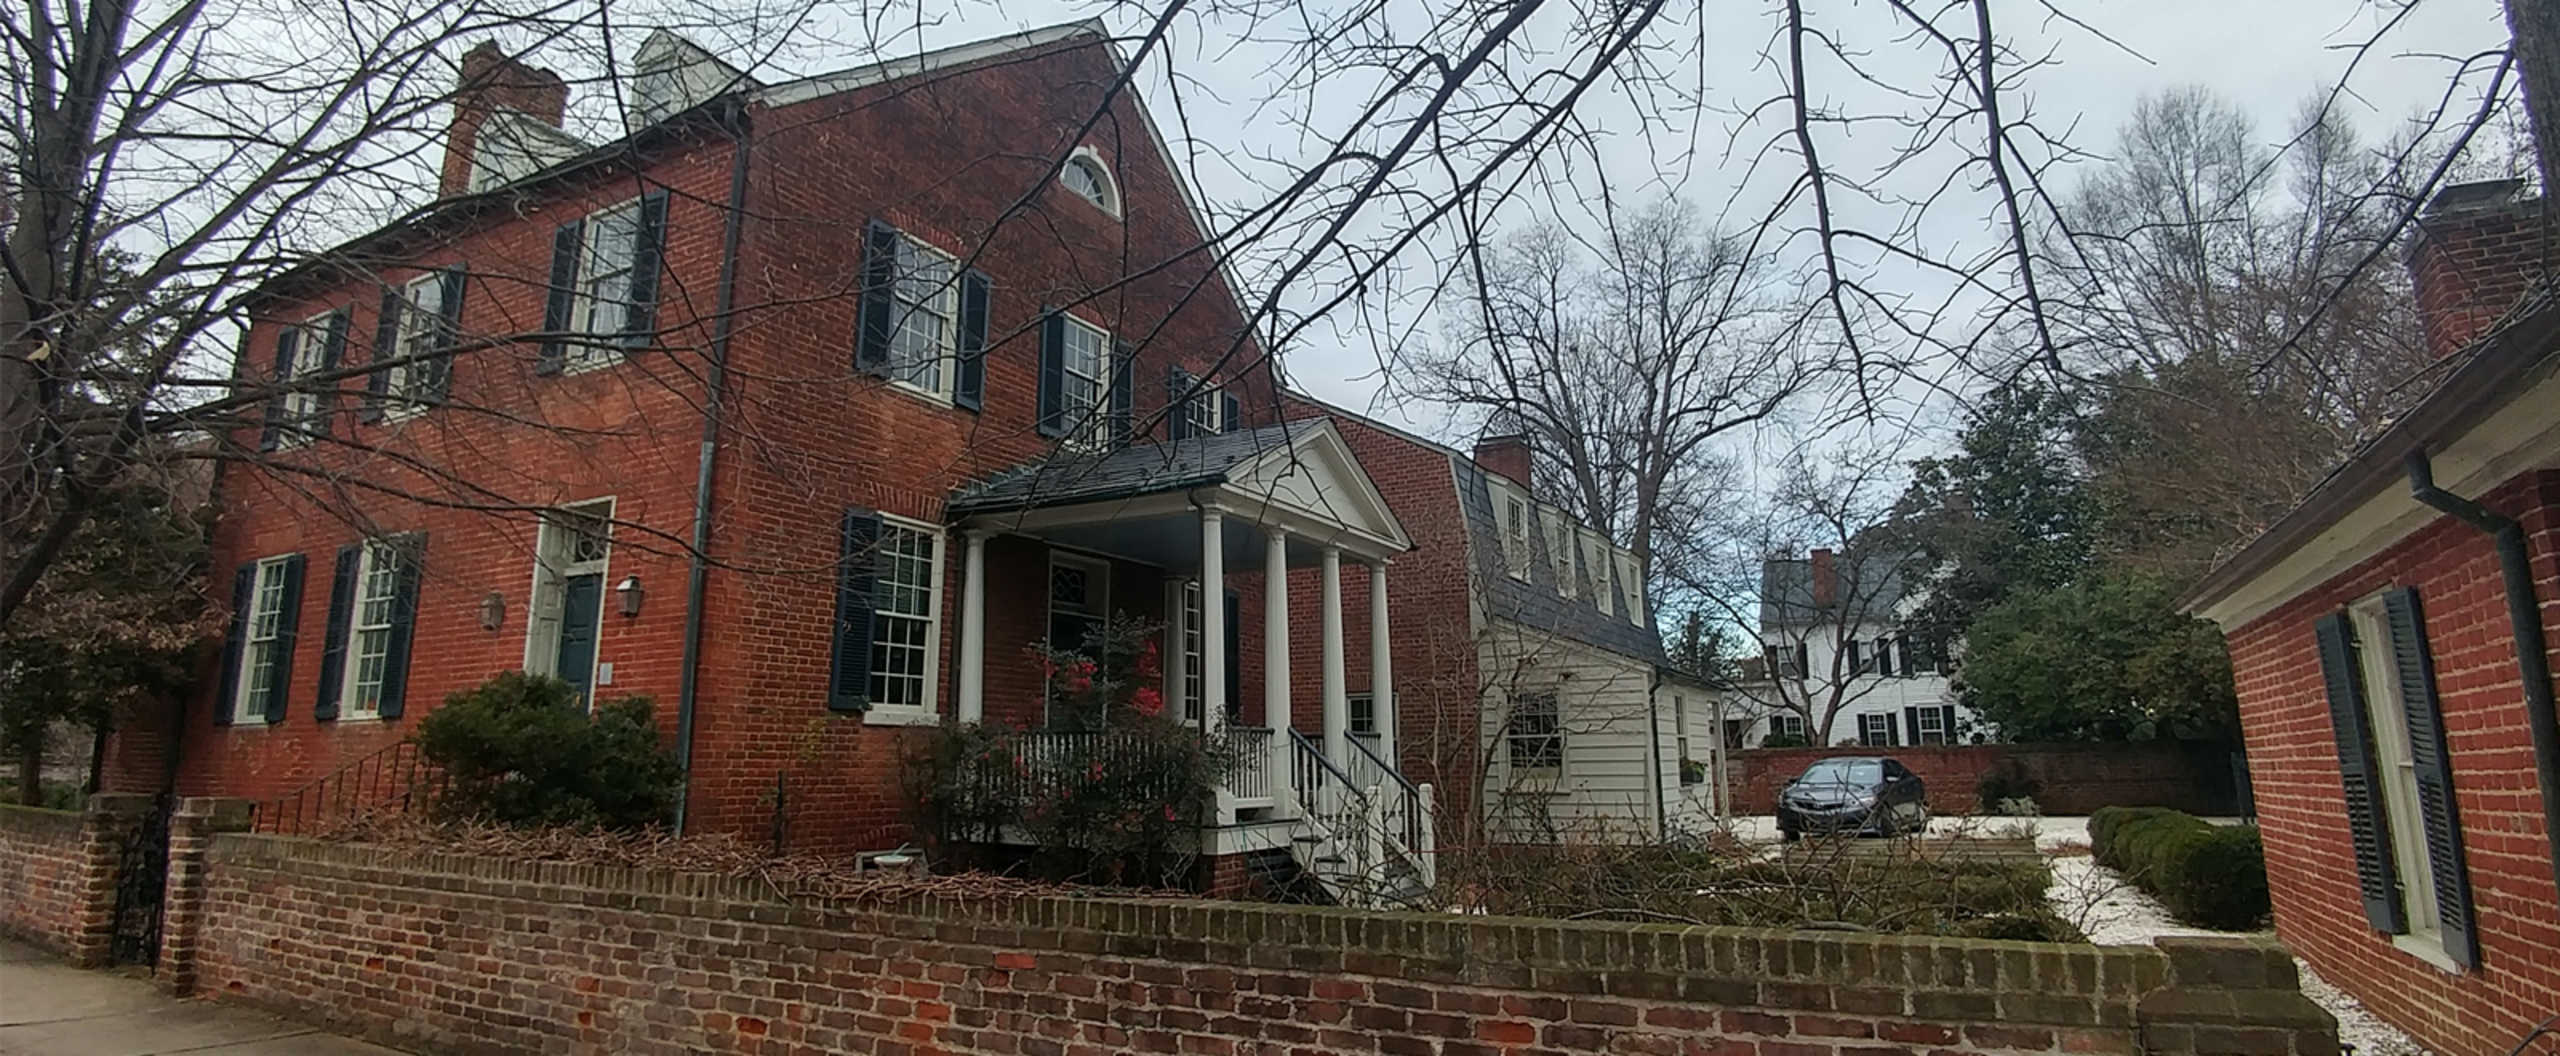 The Doggett House - Listed and sold, one of Fredericksburg's finest.